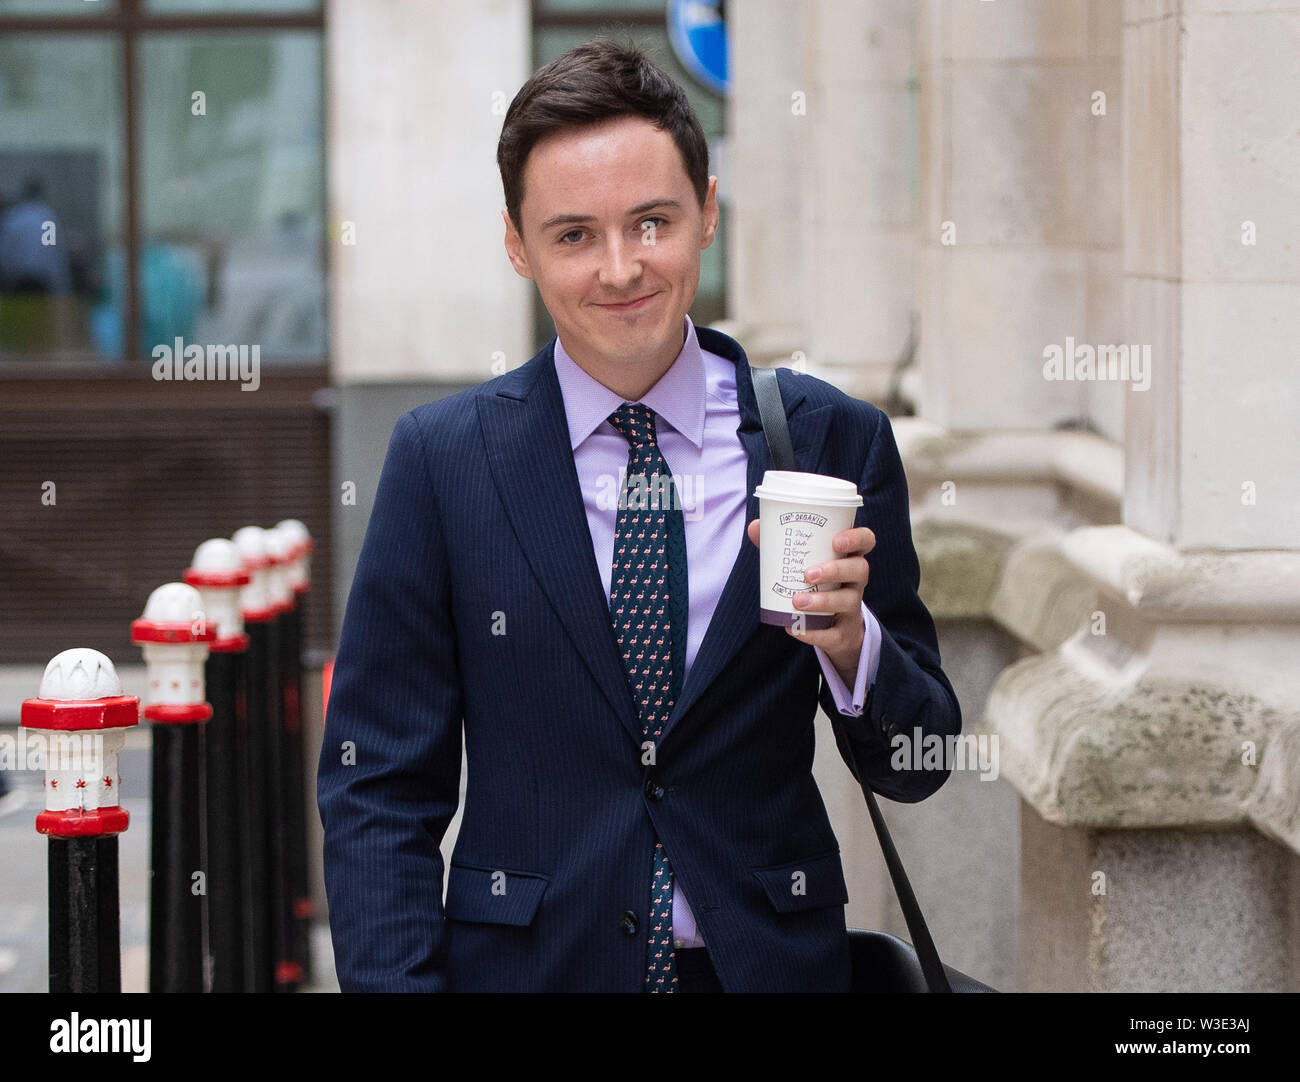 Darren Grimes arrives at the Mayor's and City of London Court to appeal against a ??20,000 fine imposed by the Electoral Commission. The founder of pro-Brexit campaign group BeLeave was fined after allegedly breaching spending rules during the EU referendum campaign. Stock Photo